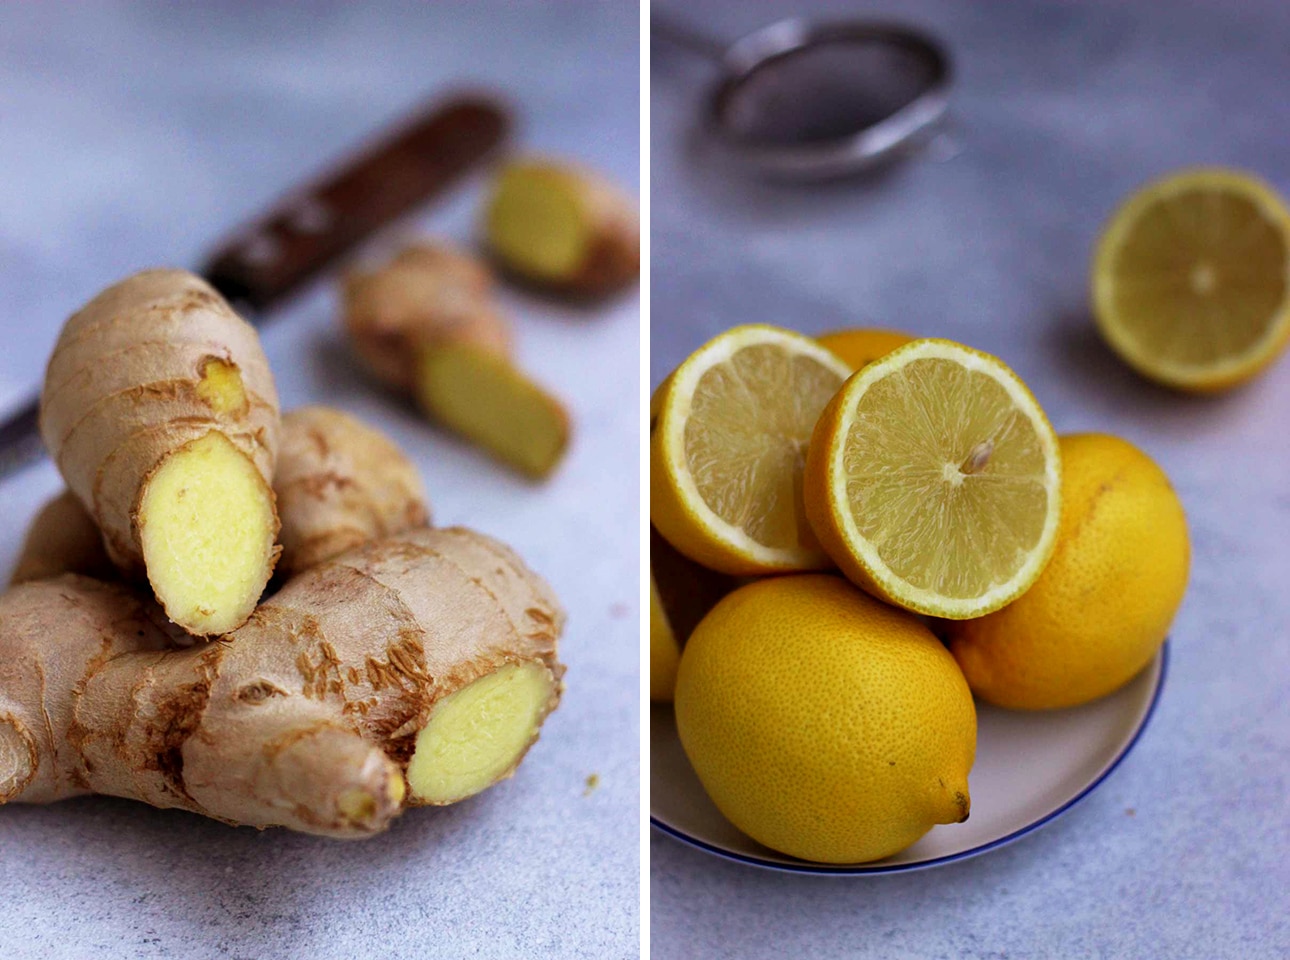 Collage of Ginger Root Next to Lemons